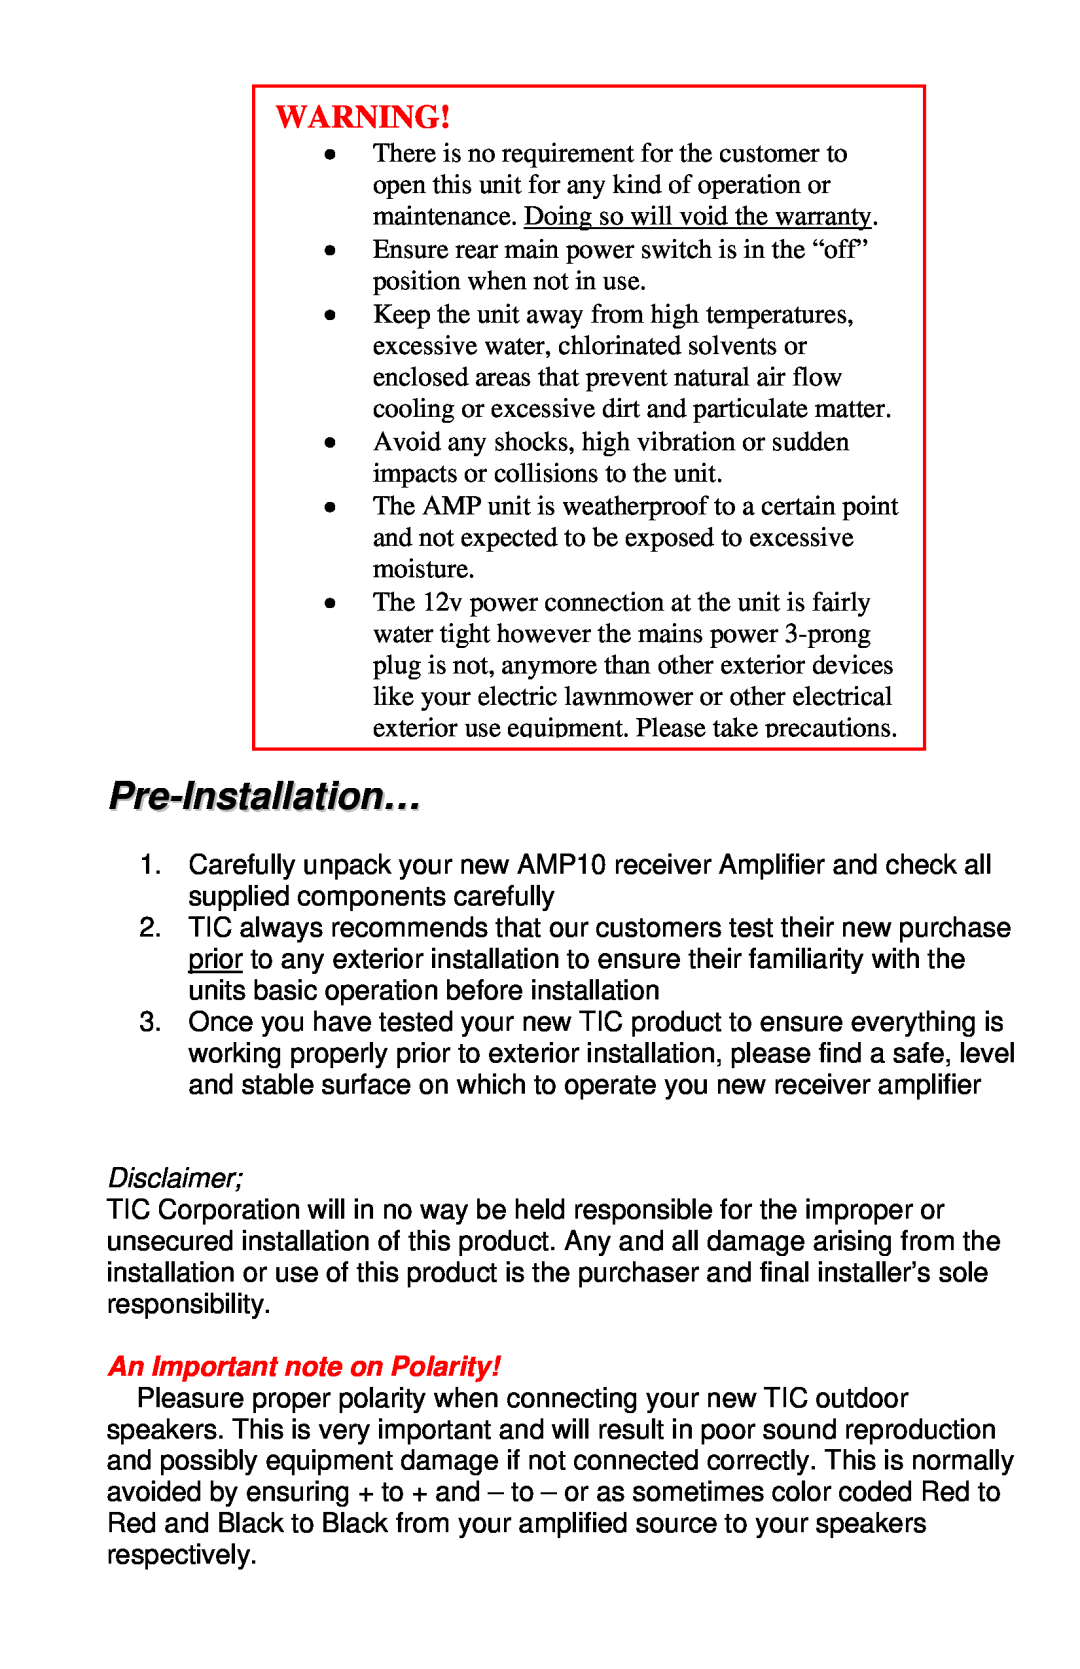 TIC AMP10 manual Pre-Installation…, An Important note on Polarity 